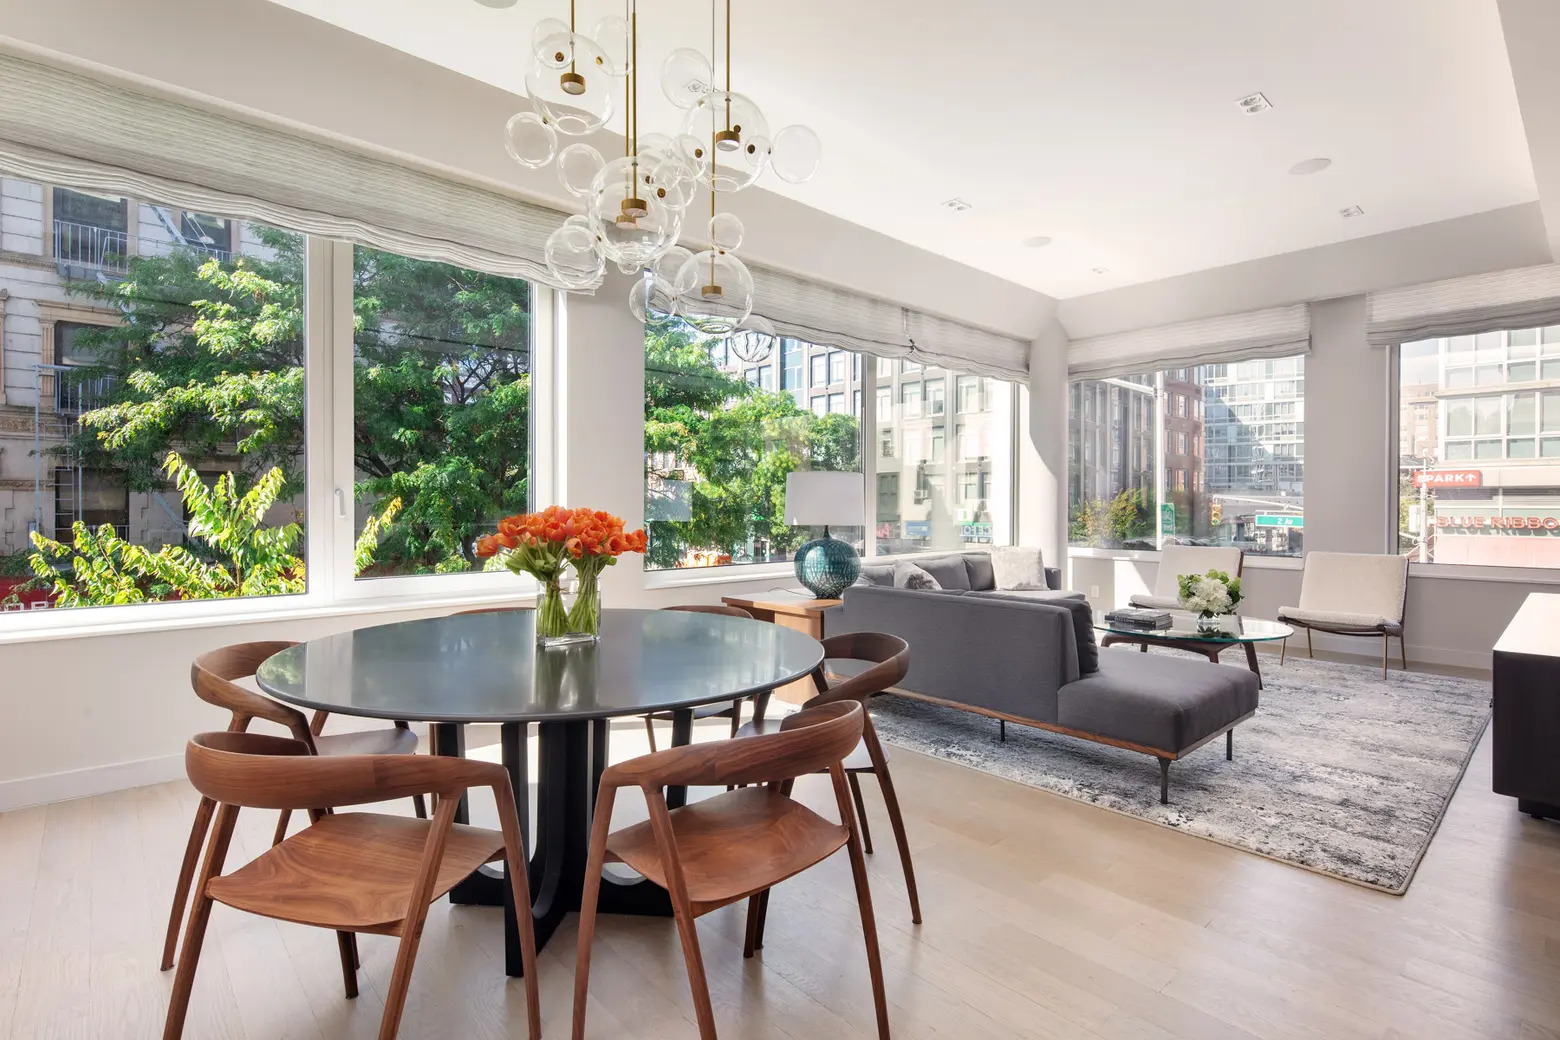 Anthony Rapp of ‘Rent’ lists East Village condo for $3.85M